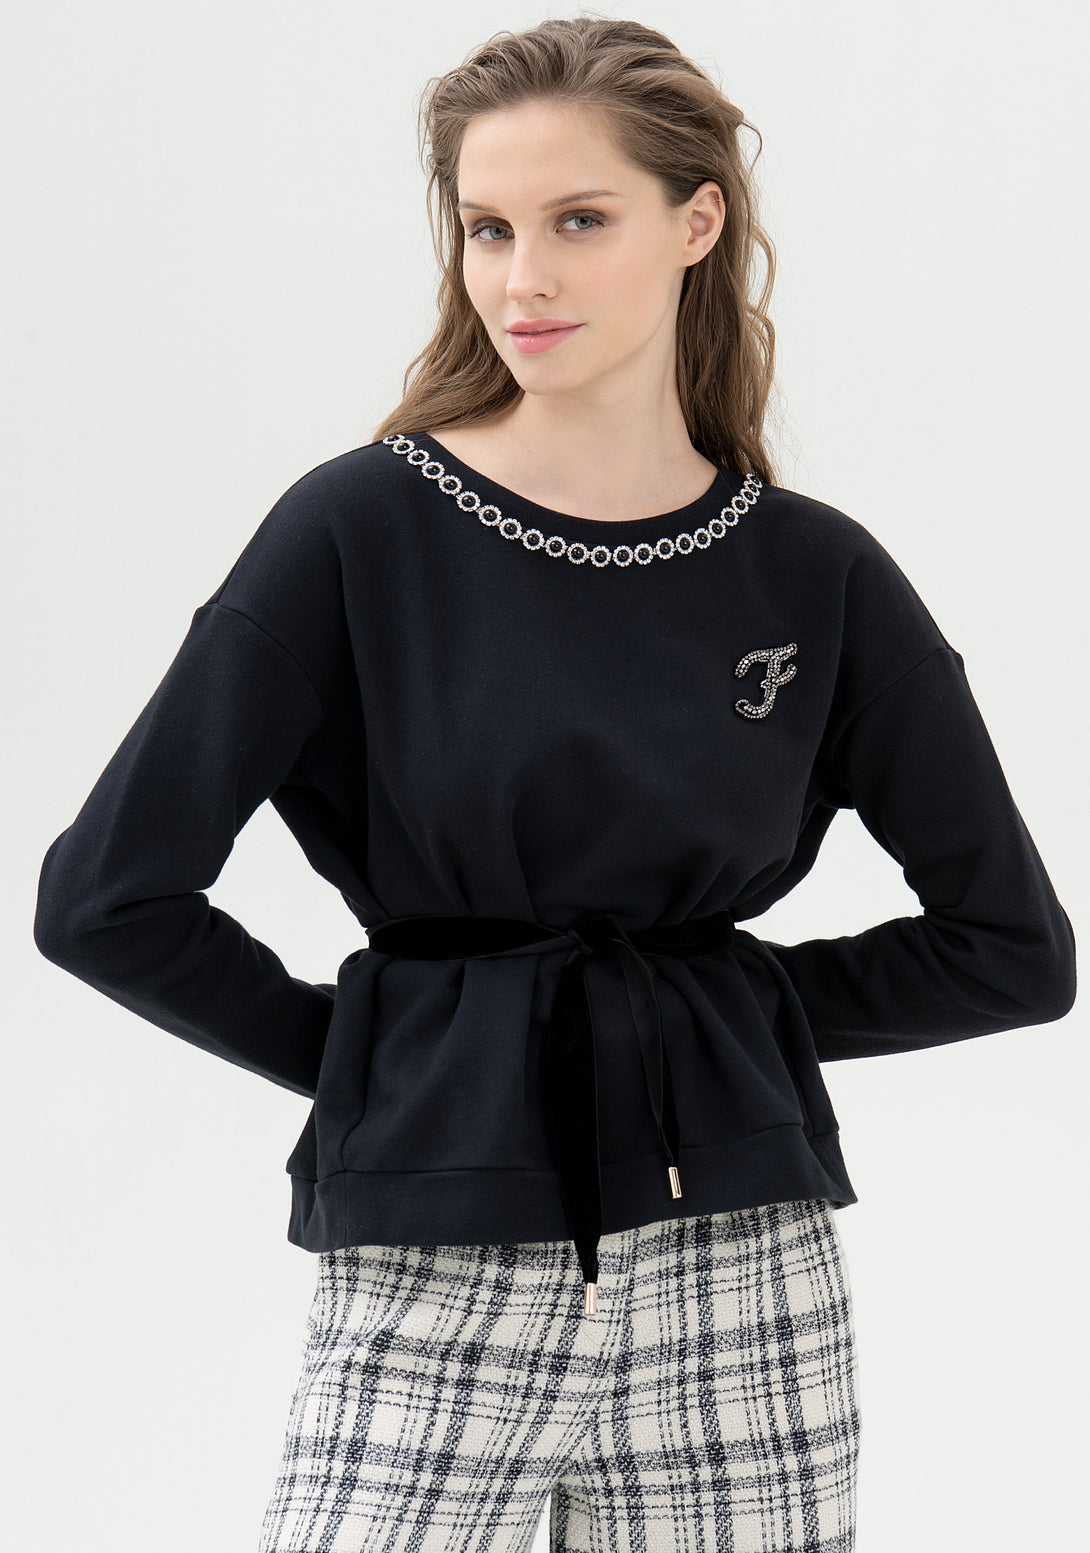 Sweater regular fit round neck with shiny applications